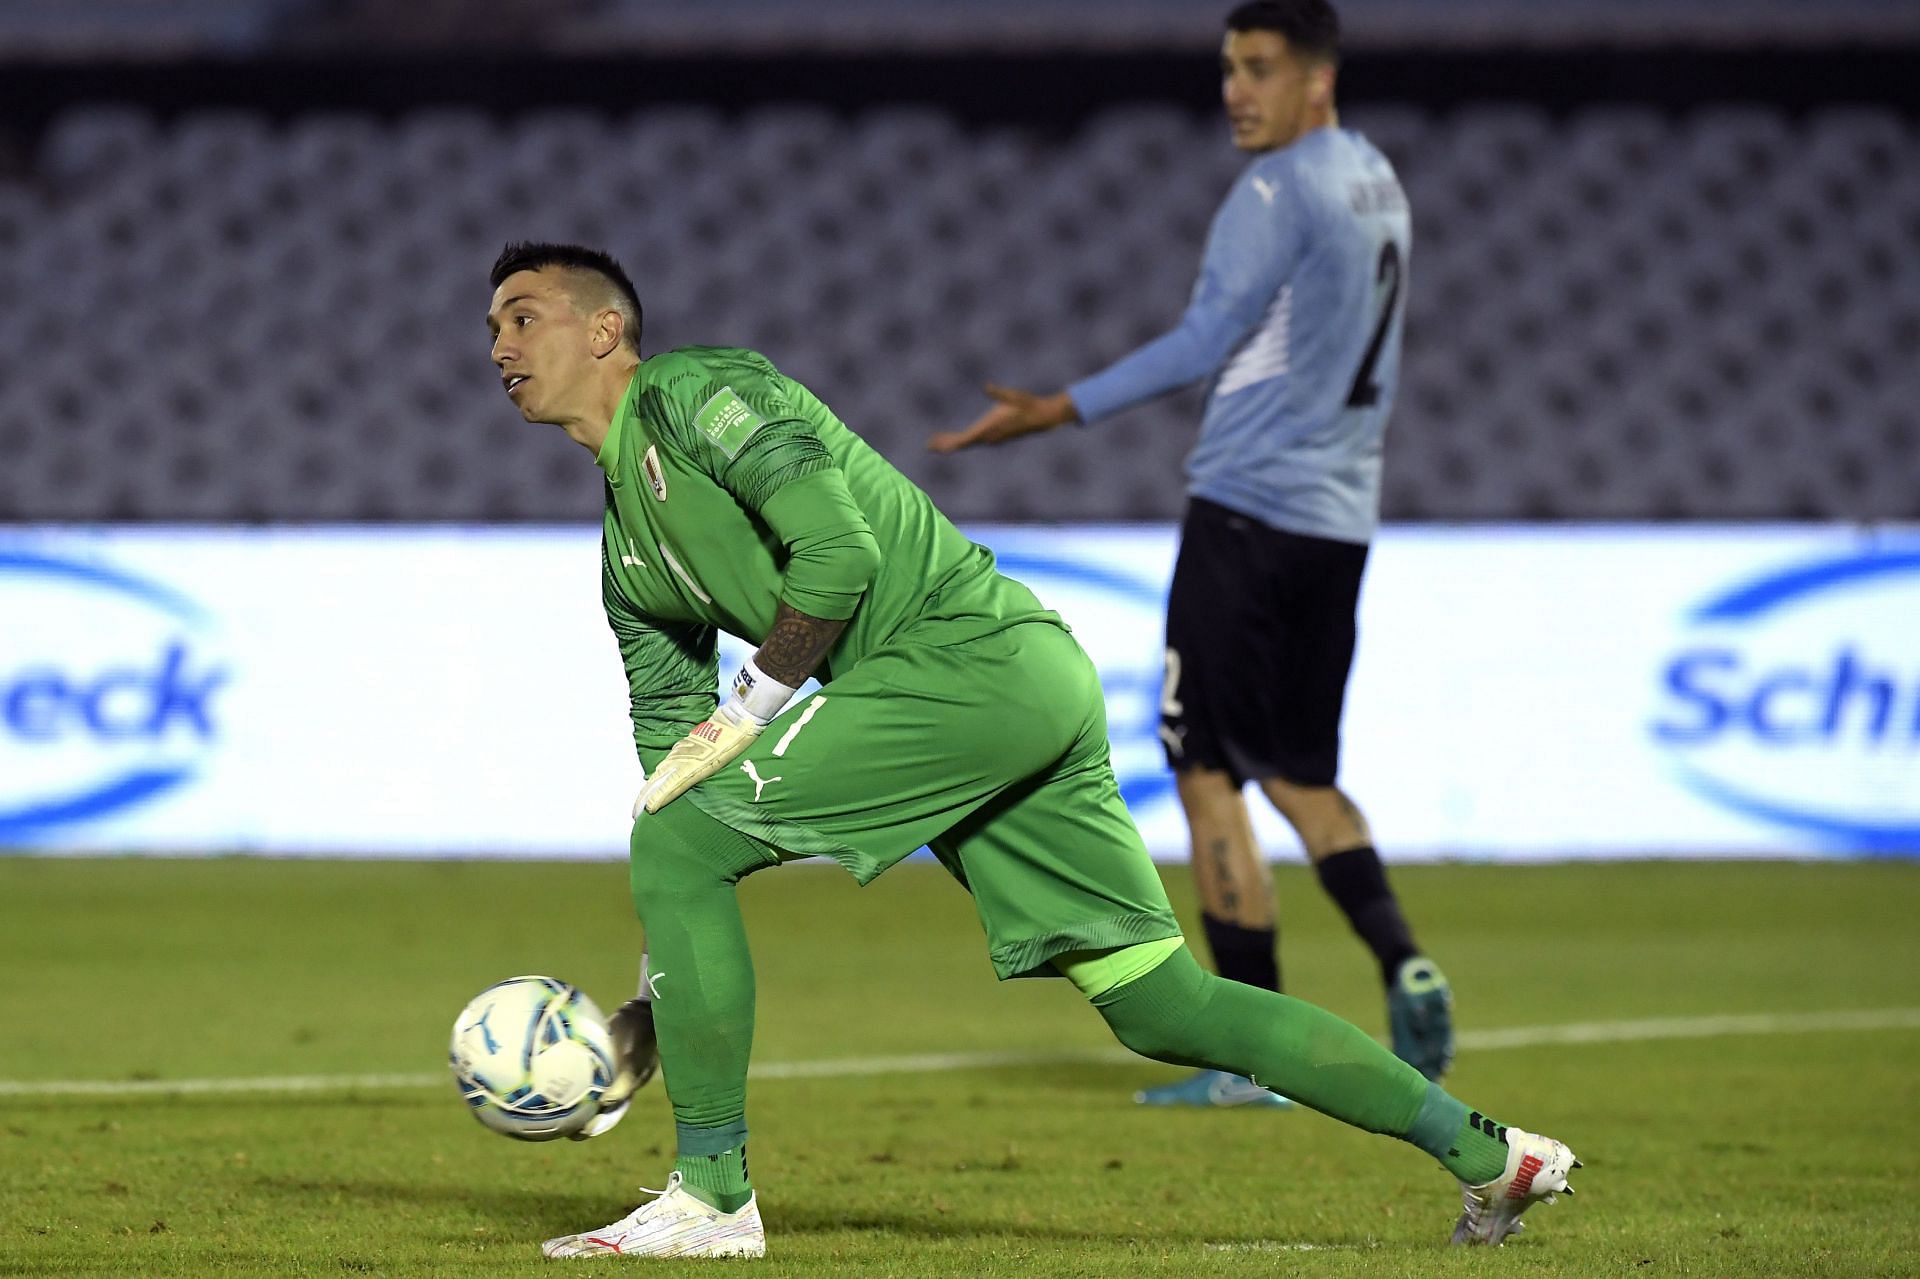 Fernando Muslera made some great saves in the second half.